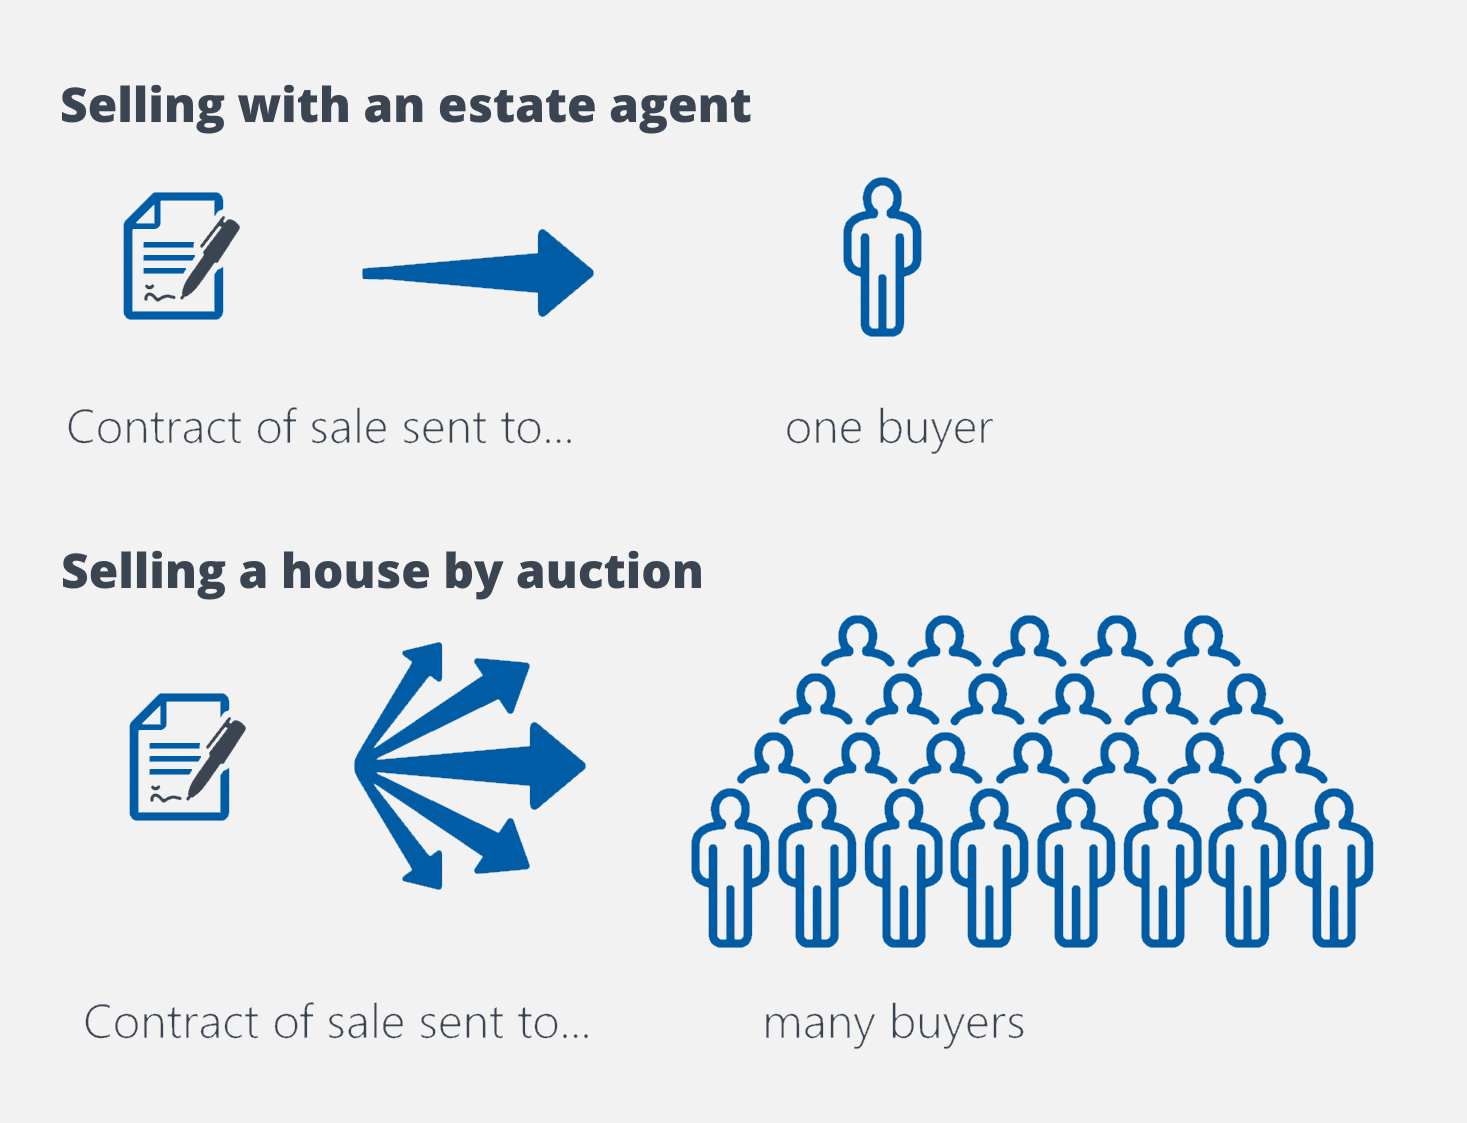 Selling a house by auction - multiple contracts